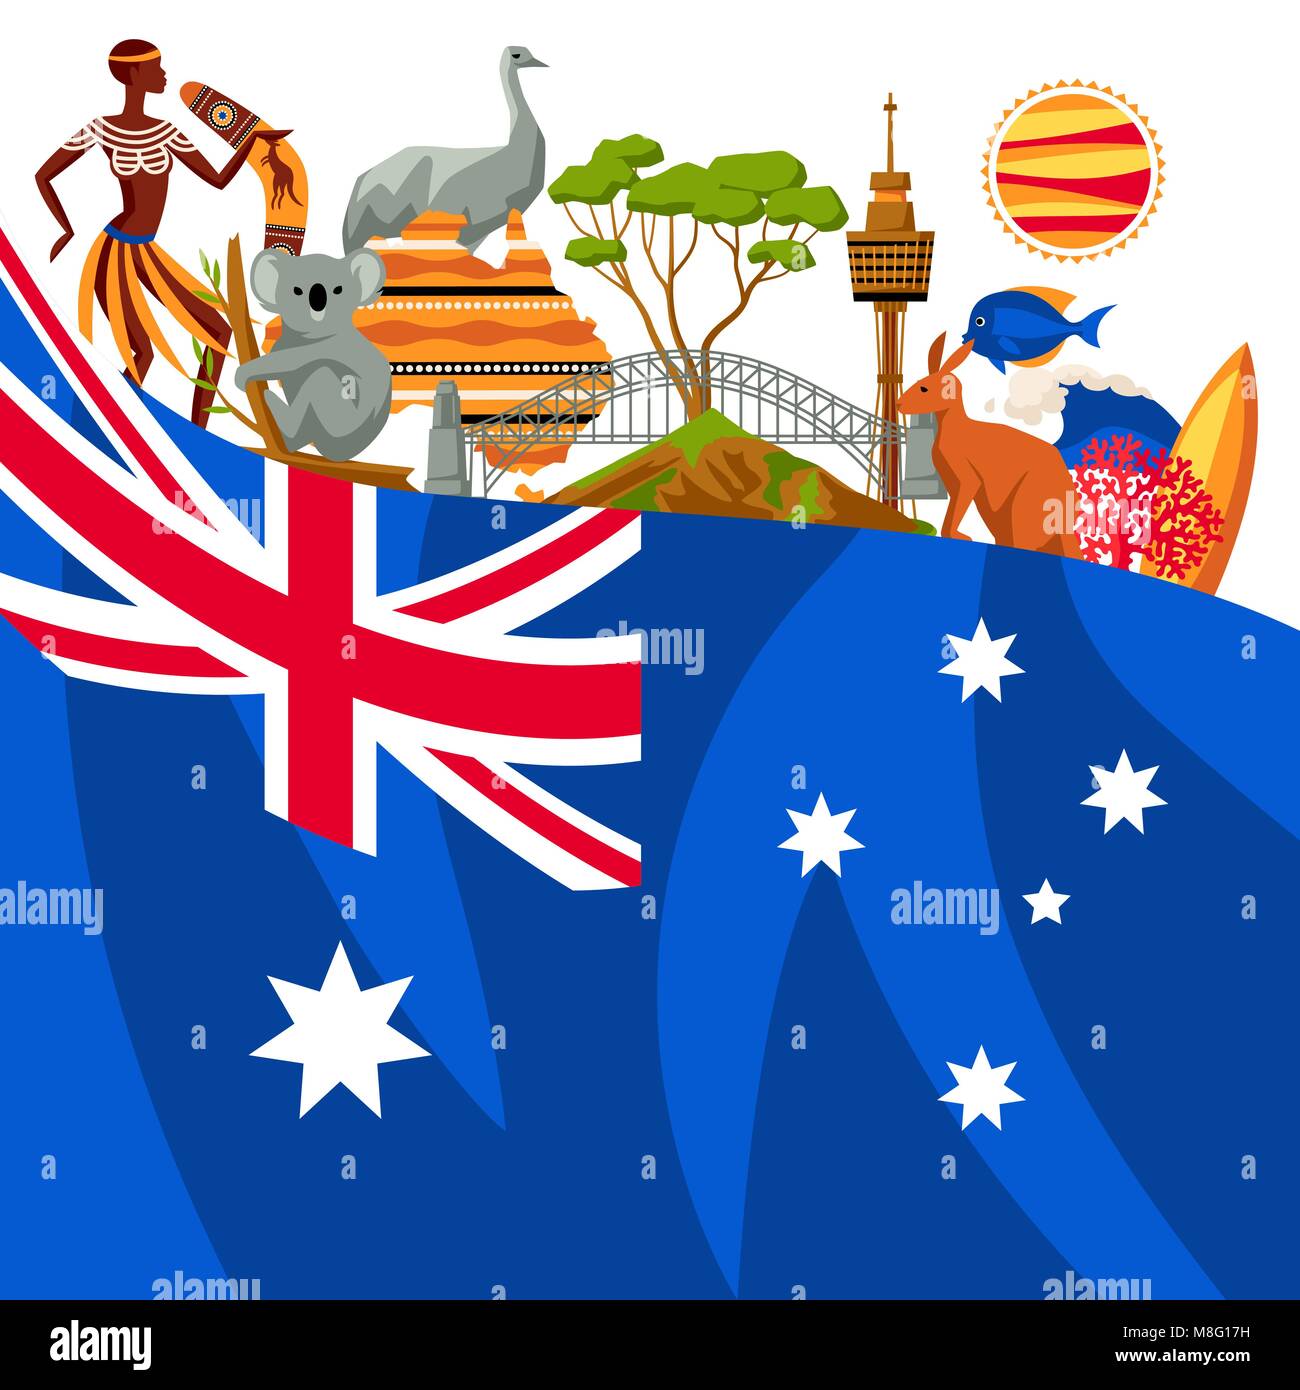 Australia background design. Australian traditional symbols and objects Stock Vector